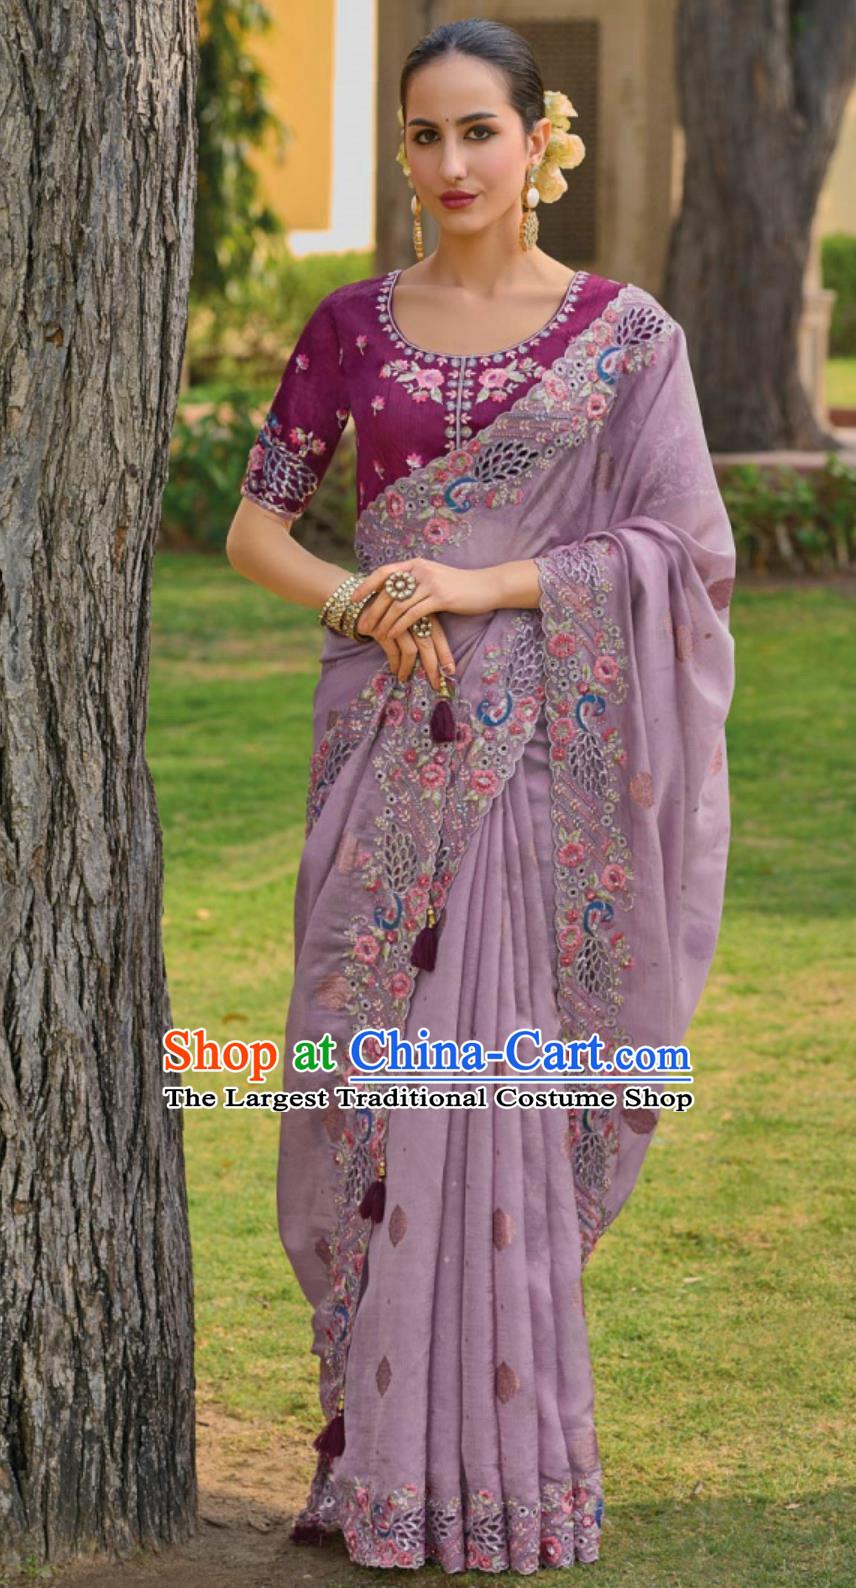 India National Clothing Indian Traditional Festival Fashion Women Embroidered Violet Sari Dress